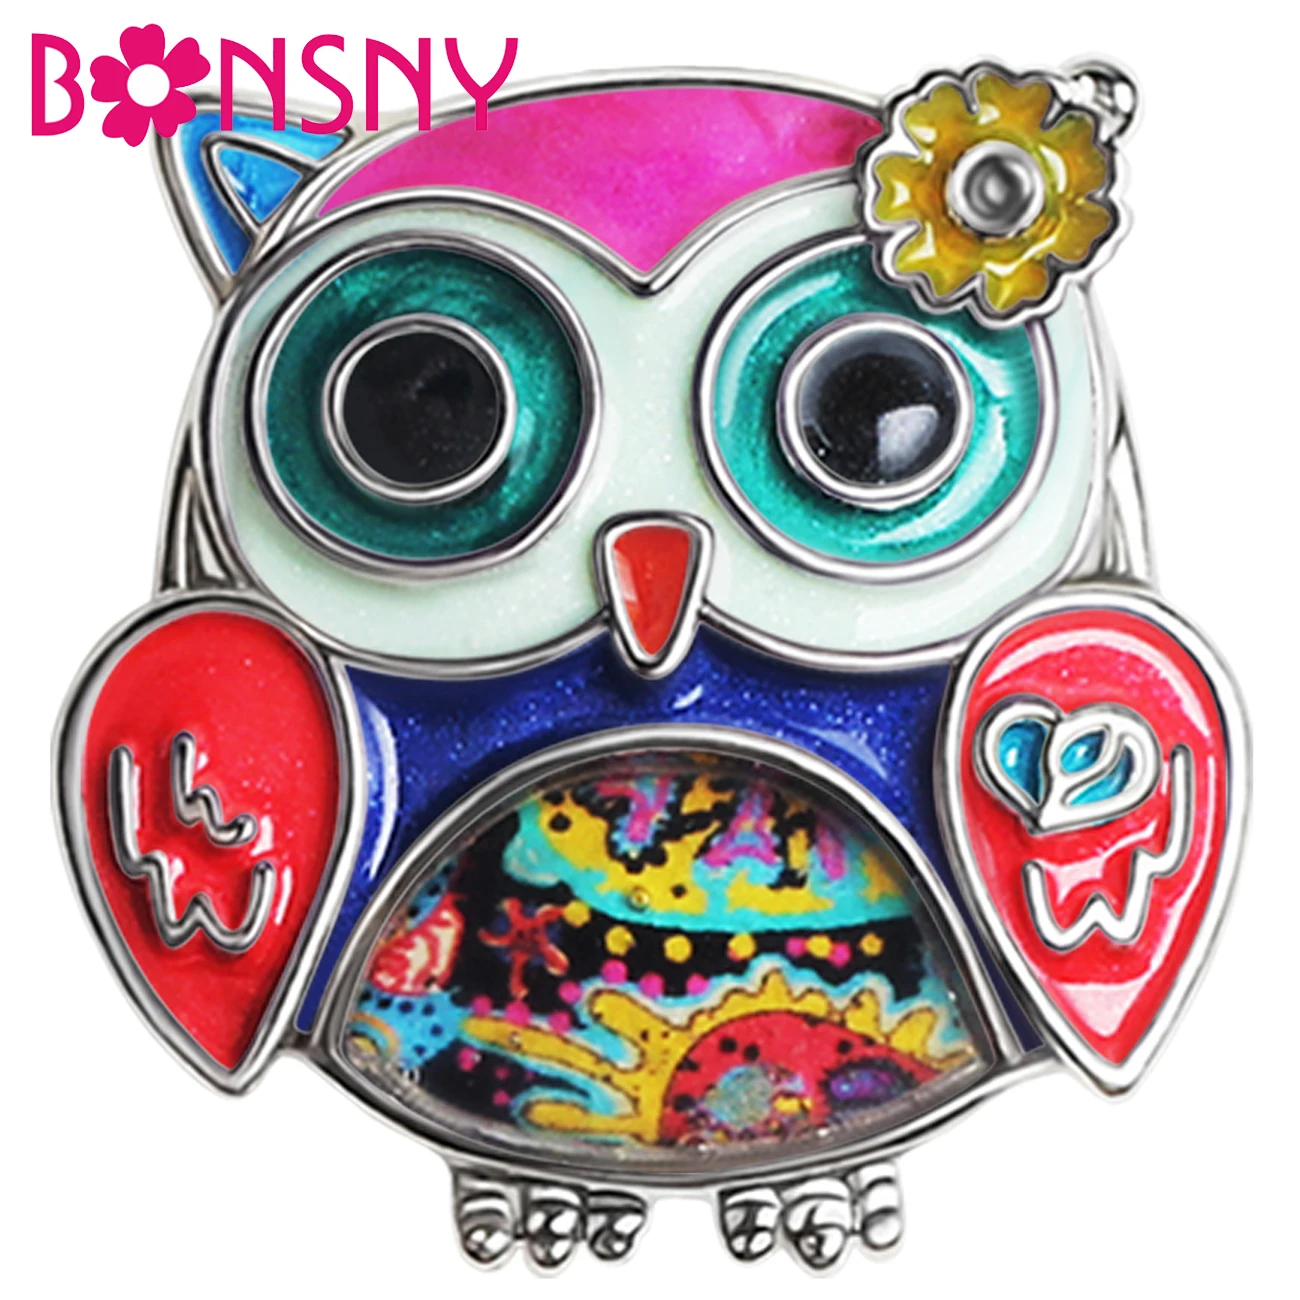 

Bonsny Enamel Alloy Metal Floral Cute Fatty Owl Brooches Big Birds Pin Gifts Fashion Jewelry For Women Teens Girls Kids Party